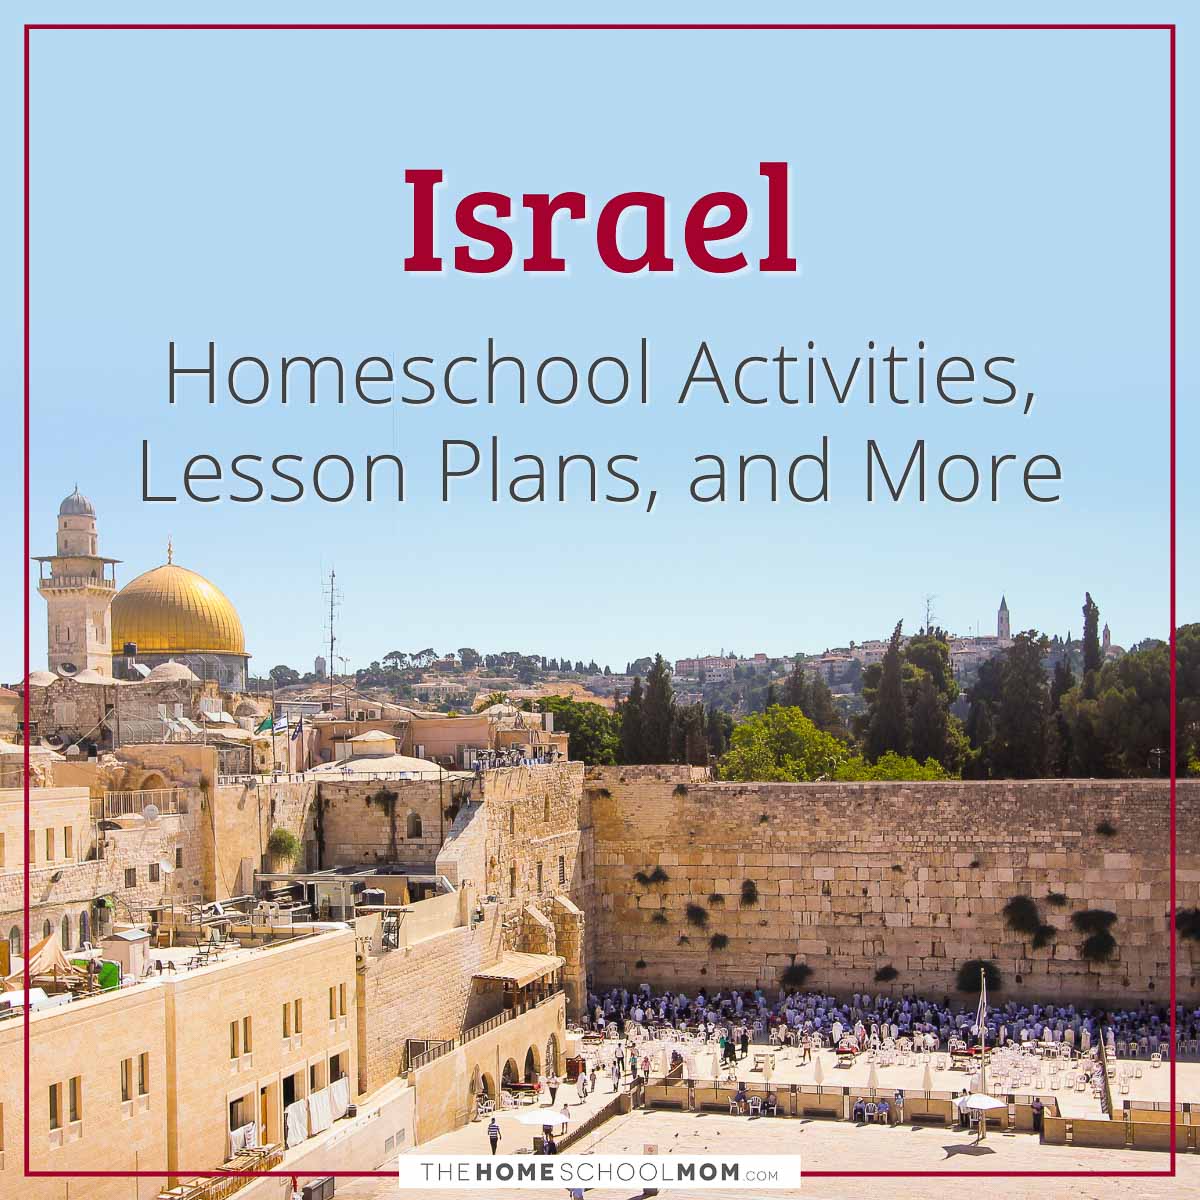 Israel Homeschool Activities, Lesson Plans, and More.